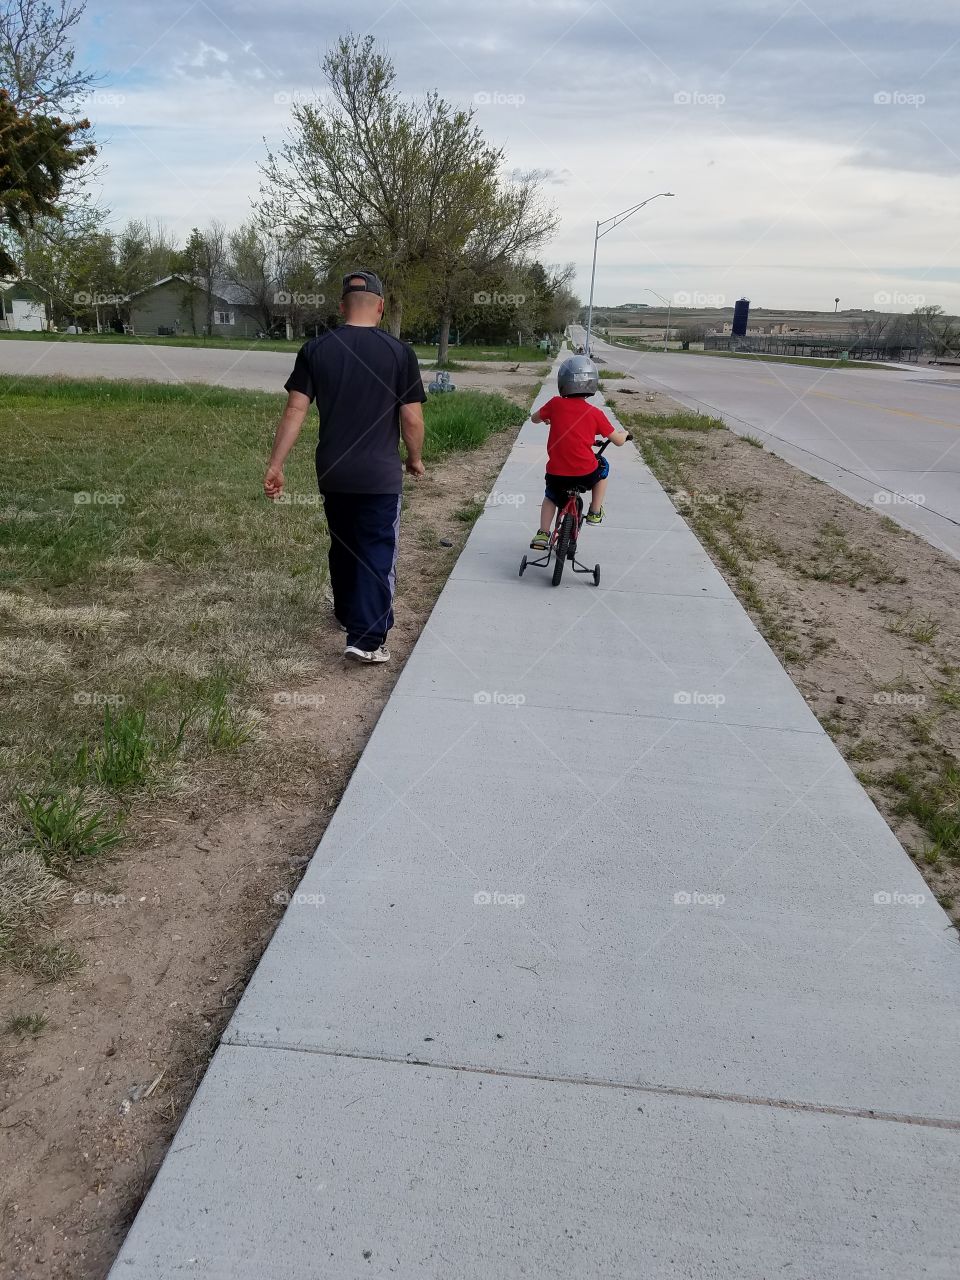 Learning to ride a bike with Dad